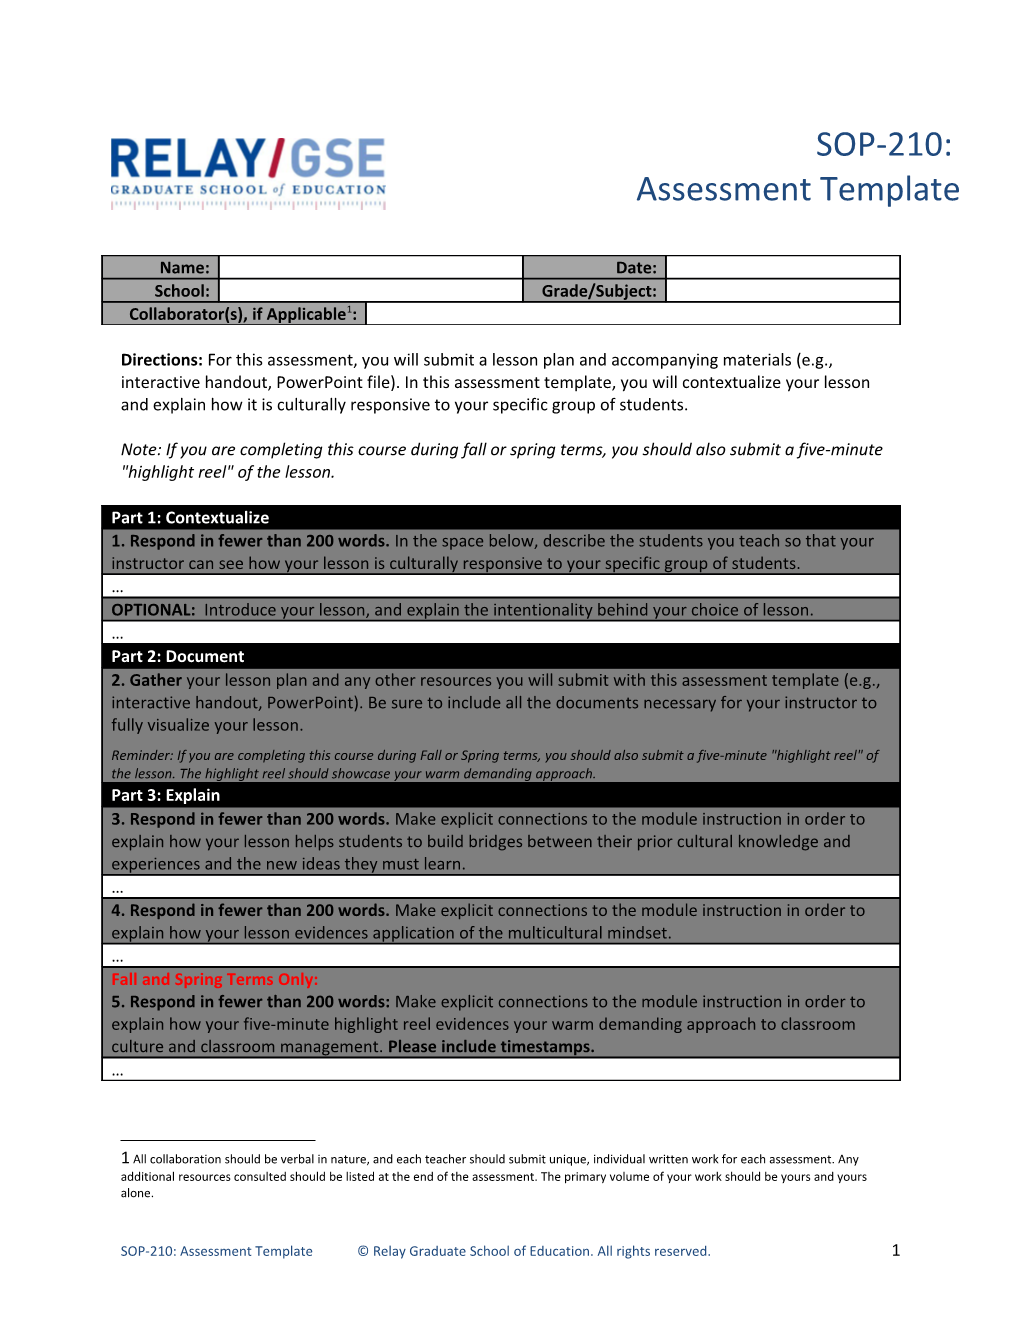 SOP-210: Assessment Template Relay Graduate School of Education. All Rights Reserved. 1